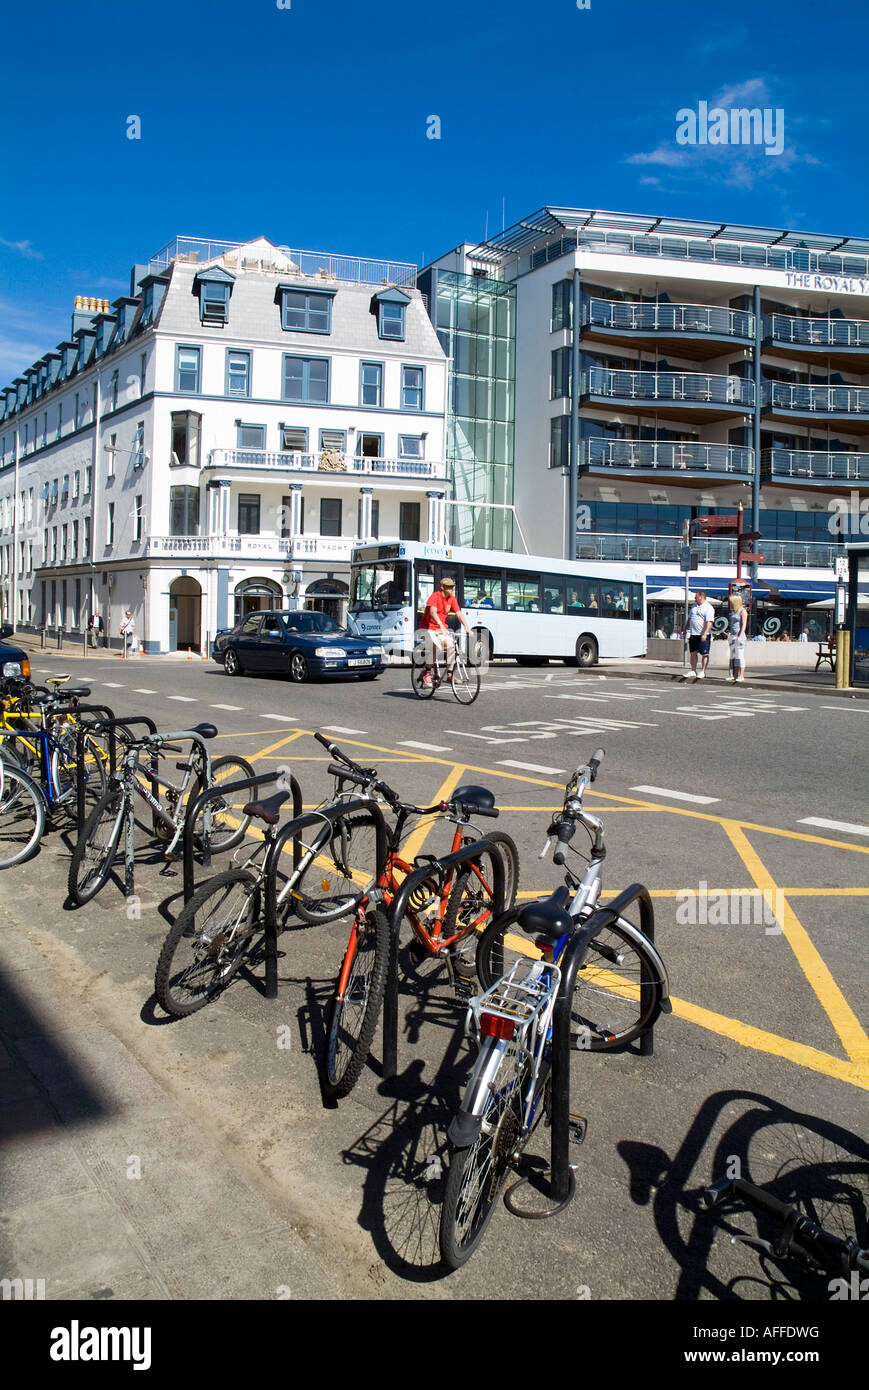 dh Weighbridge ST HELIER JERSEY Bicycle parking bicylces parked by road cyclist bicycles rack bike channel island cycling islands cycle lane Stock Photo